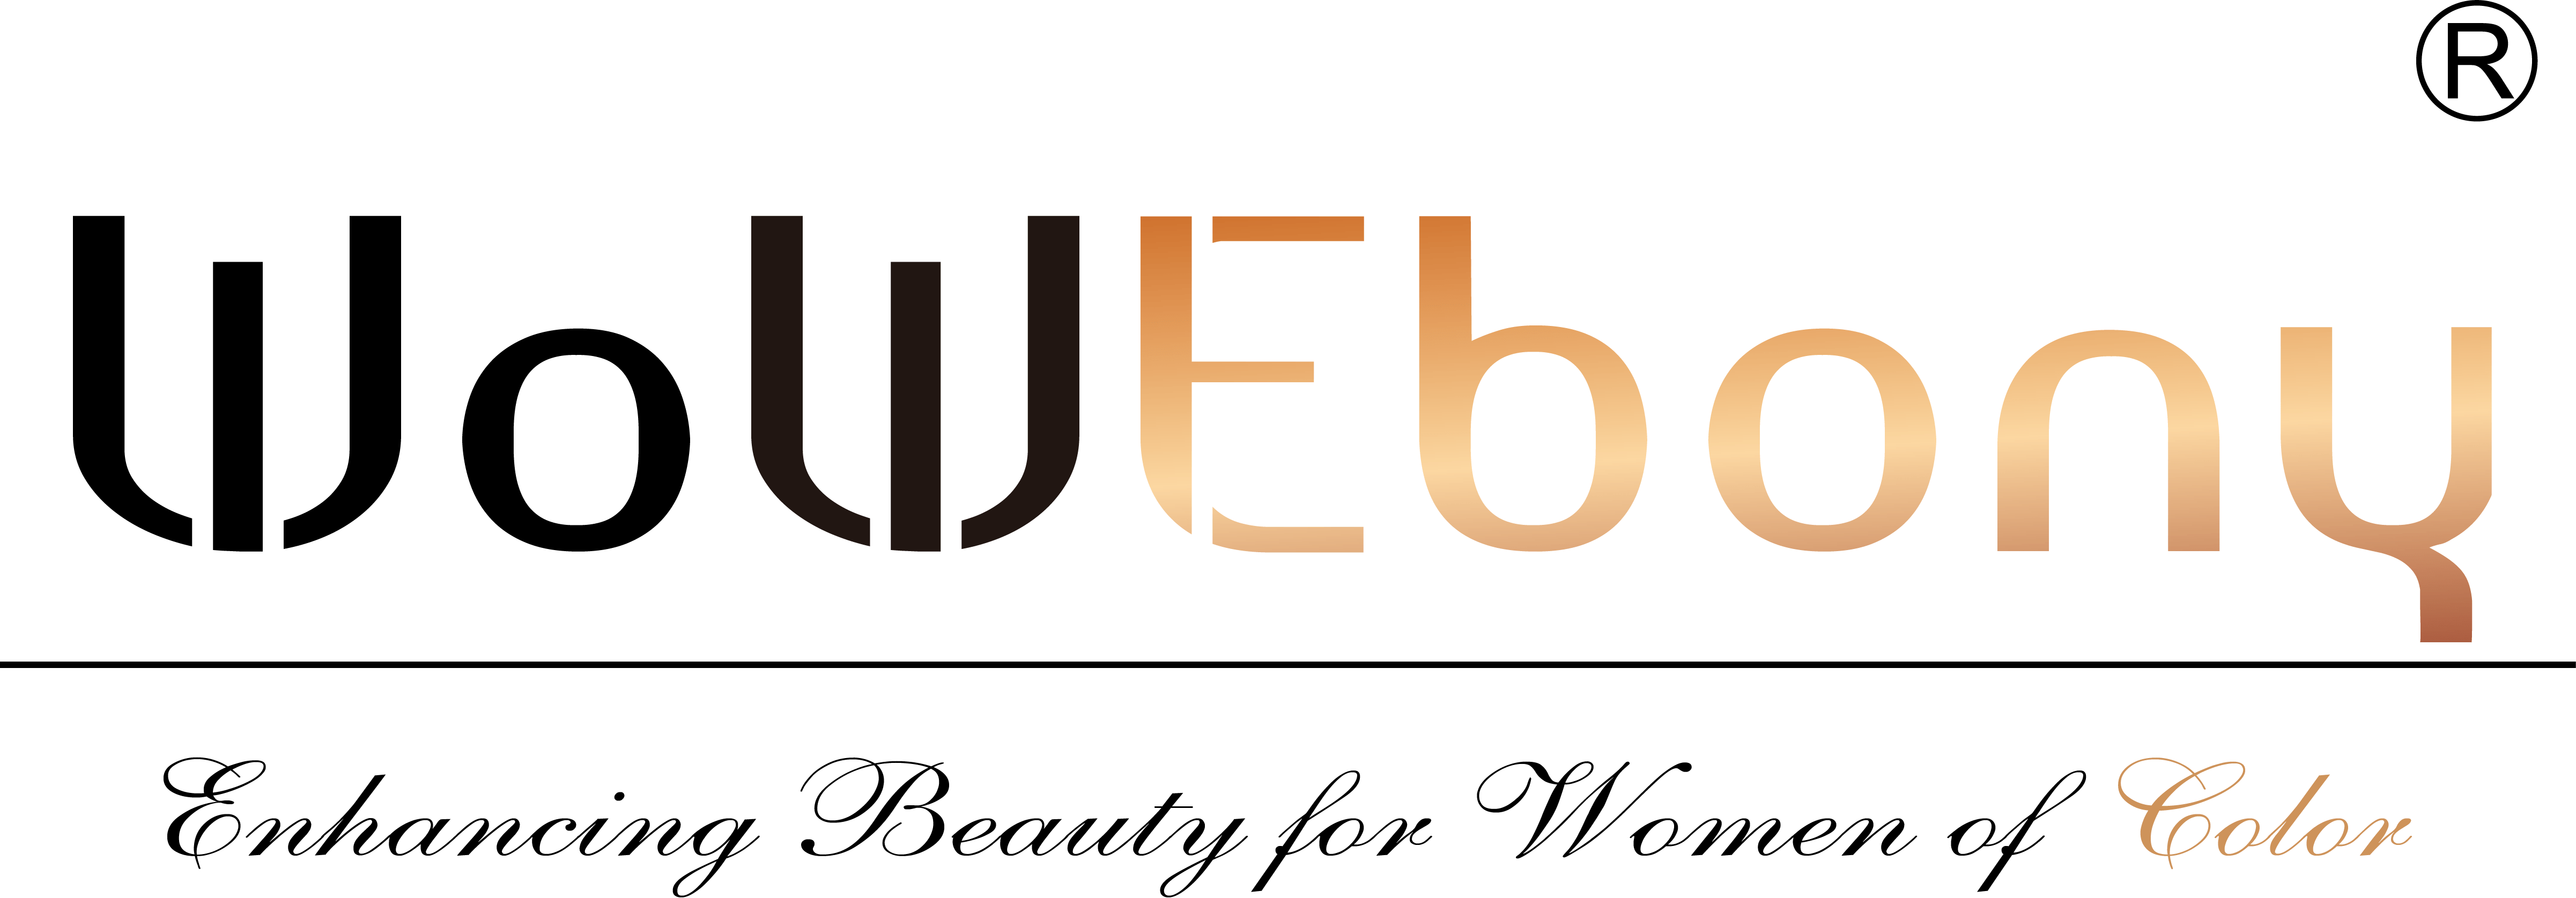 WoWebony coupon codes, promo codes and deals